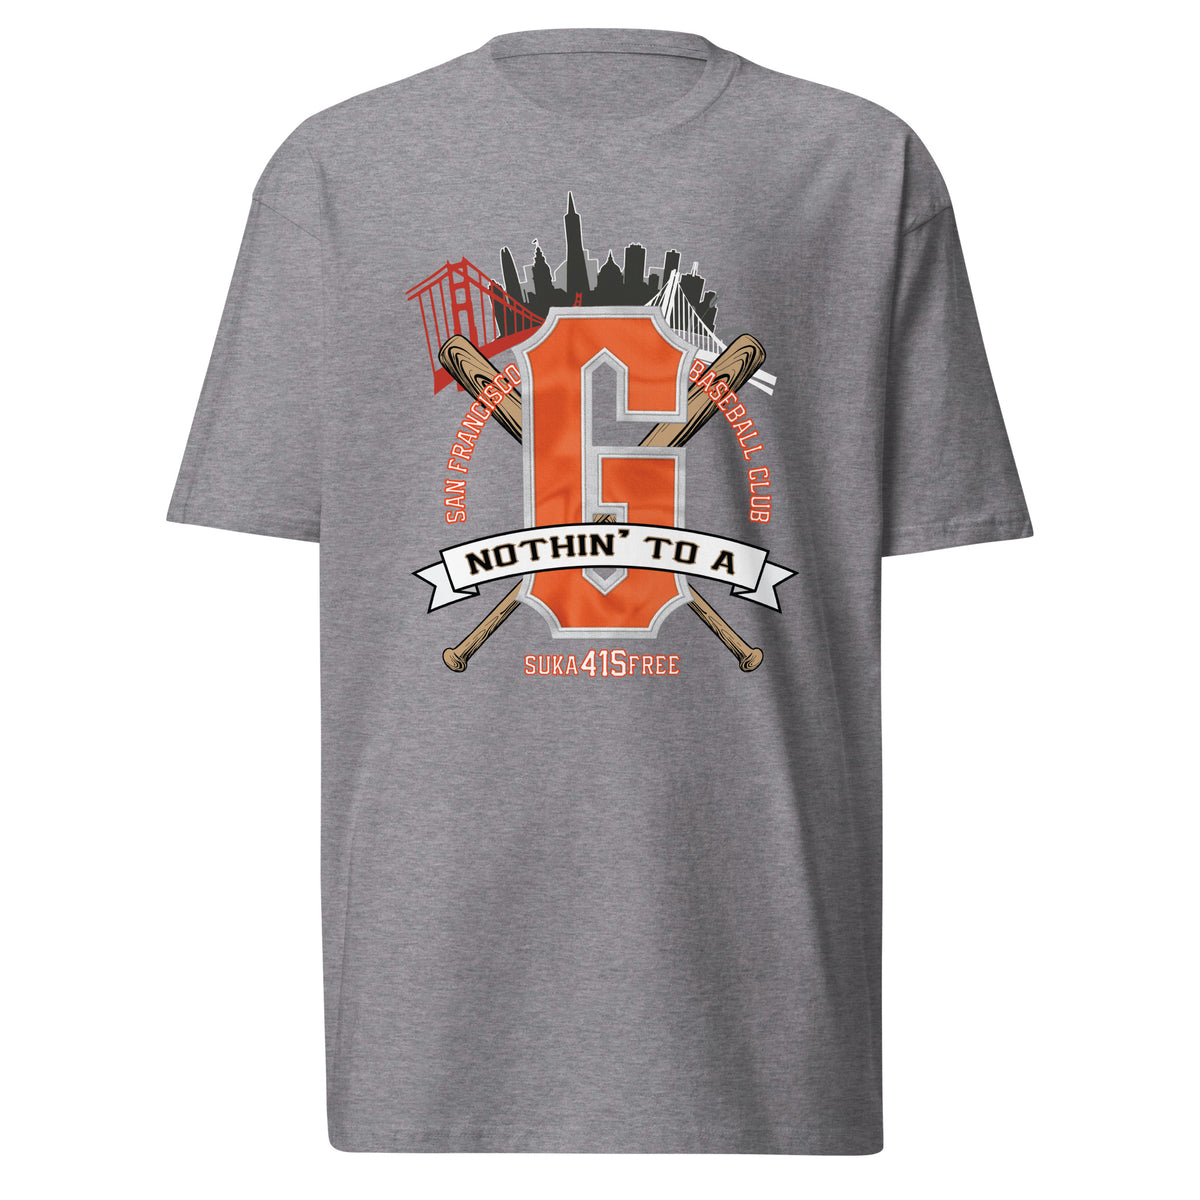 Nothin to a G T-Shirt (SF Giants)